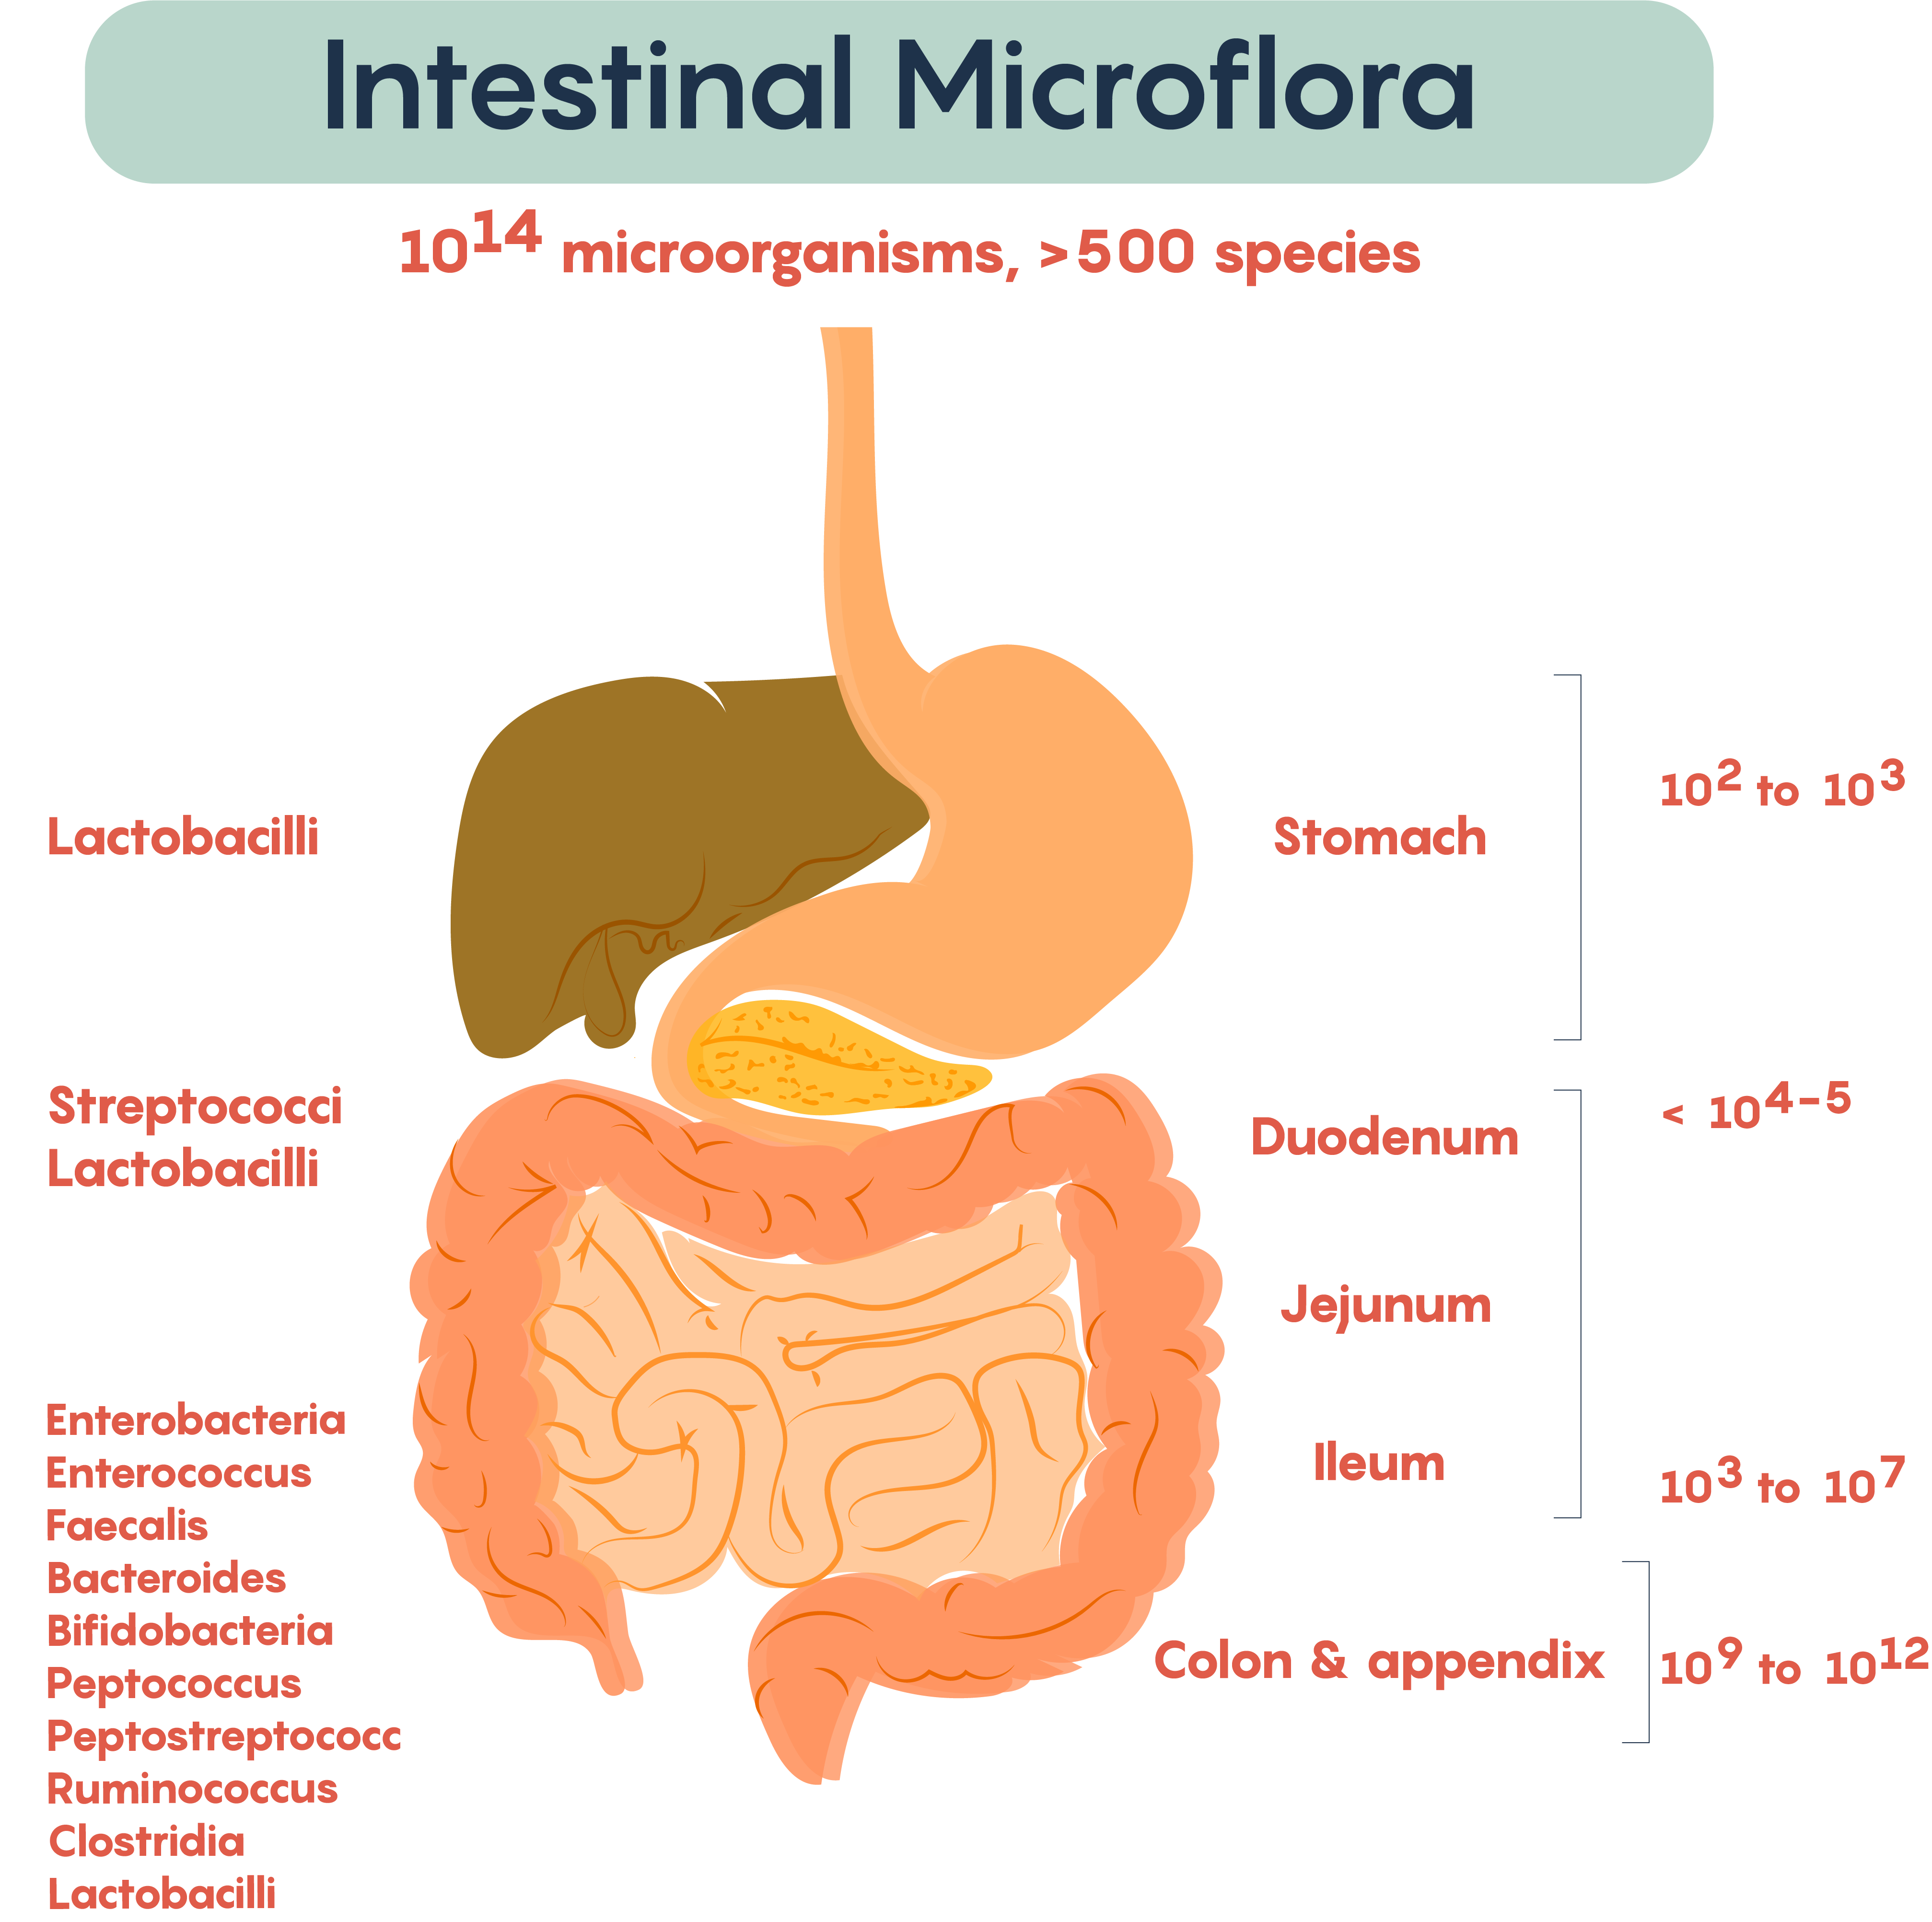 Microbial density in the gut. Overall, there are 10^14 microorganisms residing in the human gut, with over 500 unique species. In the stomach, the majority are the Lactobacilli, making up about 10^2 to 10^3. In the Duodenum, there are Streptococci and  Lactobacilli, with a concentration of 10^4 or 10^5.  As we descend past the jejunum and into the ileum, the concentration of bacteria increase dramatically - up to ten million bacteria reside here. Bacteria such as Enterobacteria, Enterococcus, Faecalis, Bacteroides, Bifidobacteria, Peptococcus, Peptosteptococc, Ruminococcus, Clostridia, and Lactobacilli. These bacteria are also common in the colon and appendix, but the microorganism concentrations increase yet again, to 10^9 to 10^12. There is a general trend that complexity and concentration of bacteria increases as we descend the GI tract.